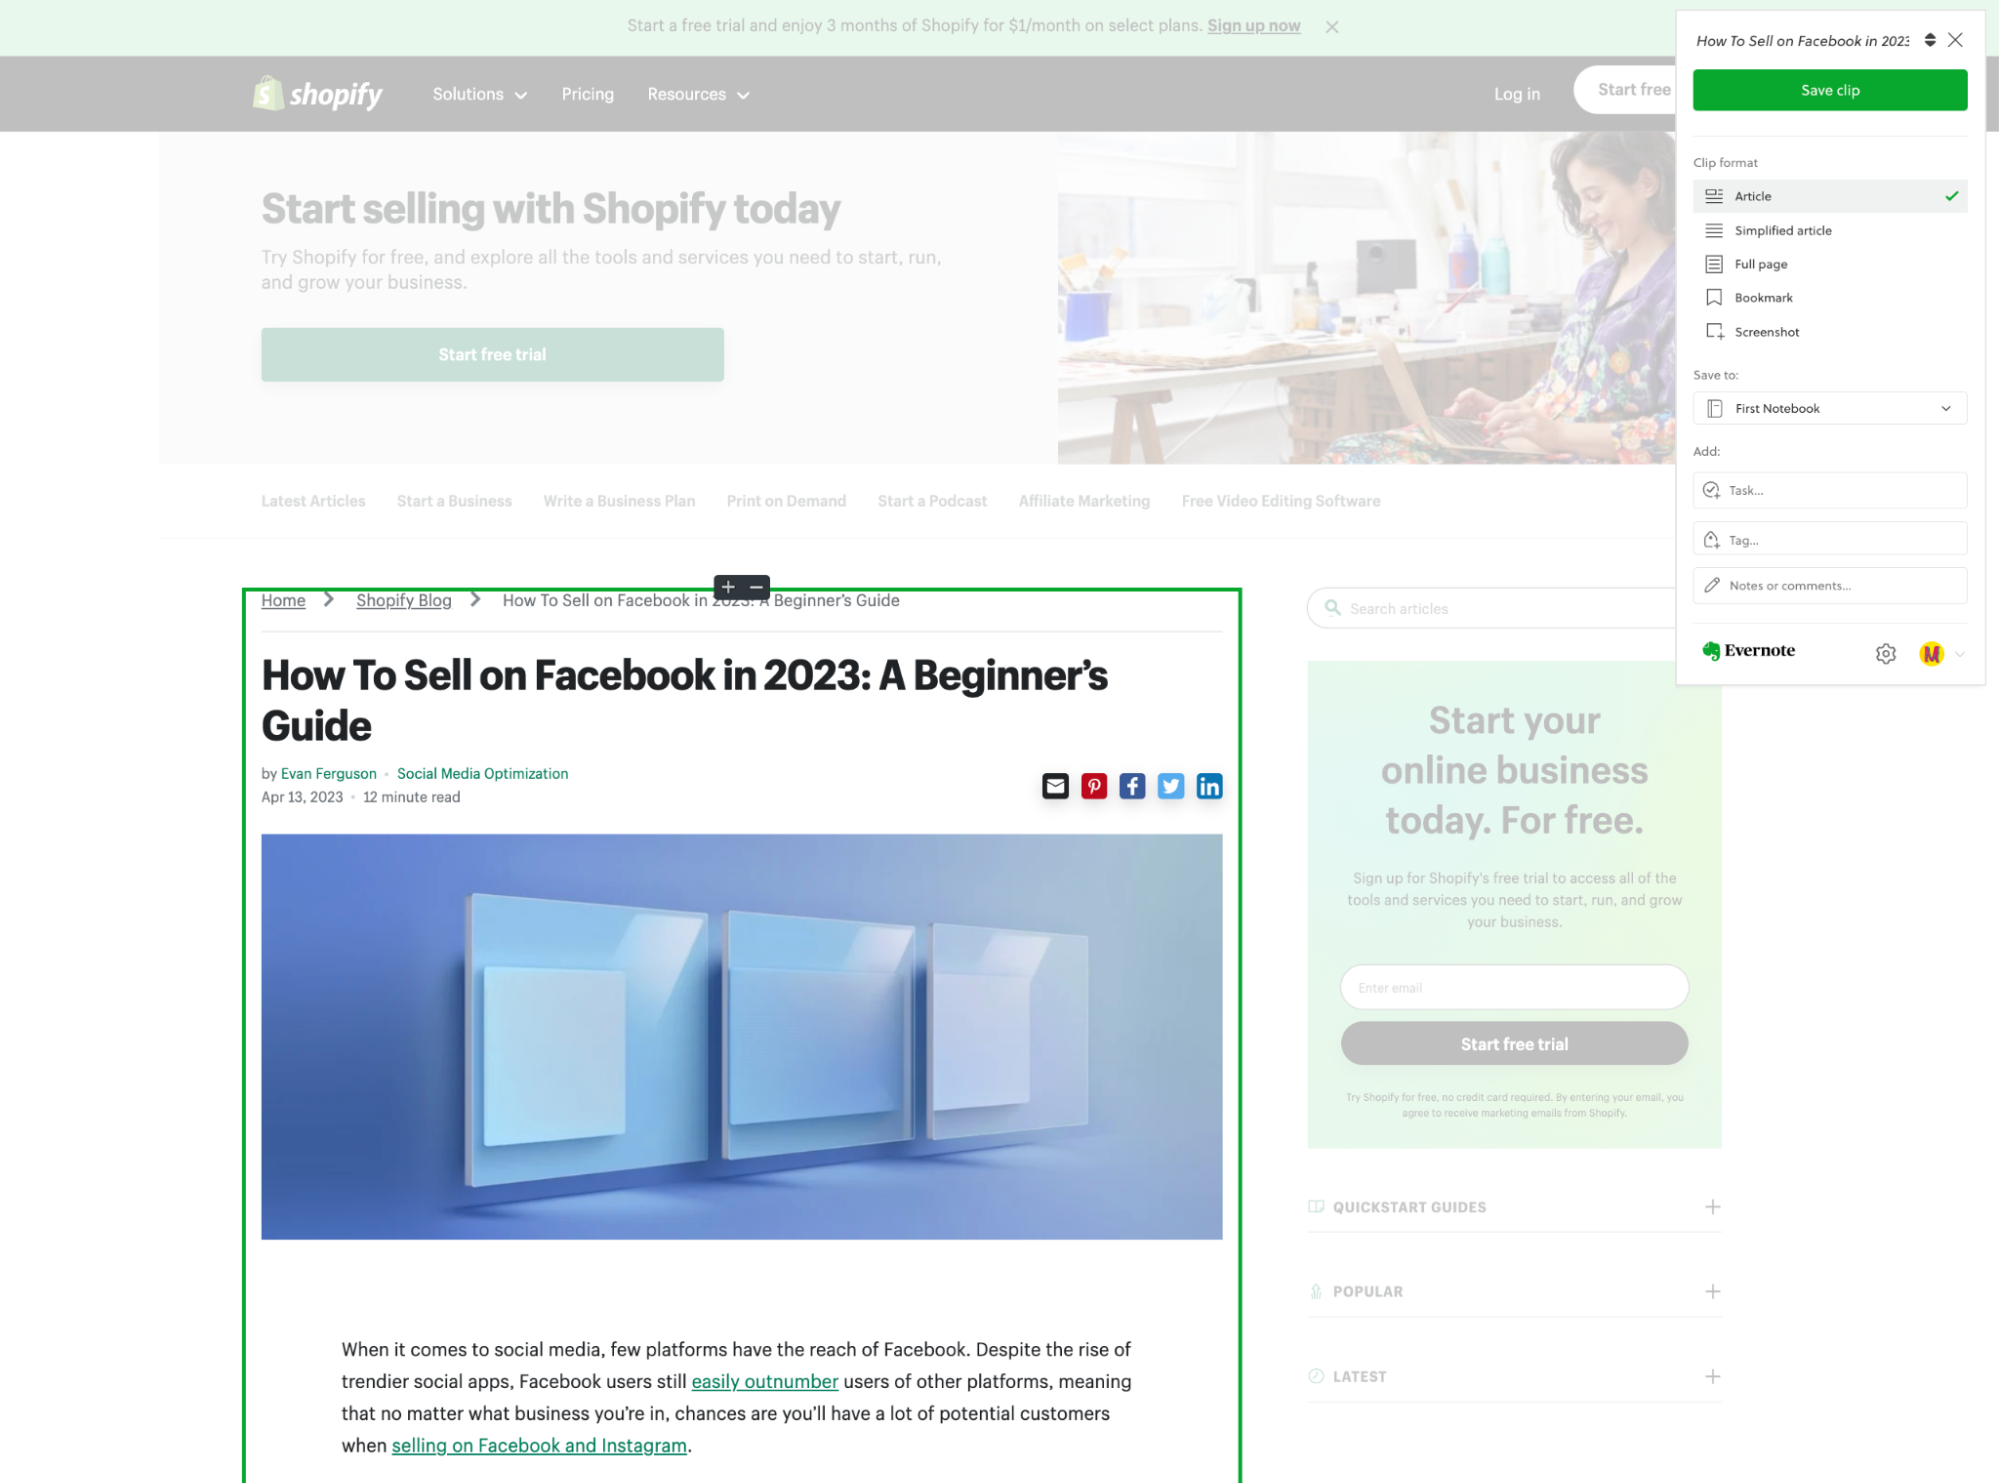 Shopify blog article ’How to Sell on Facebook in 2023’ with Evernote clipping tool.